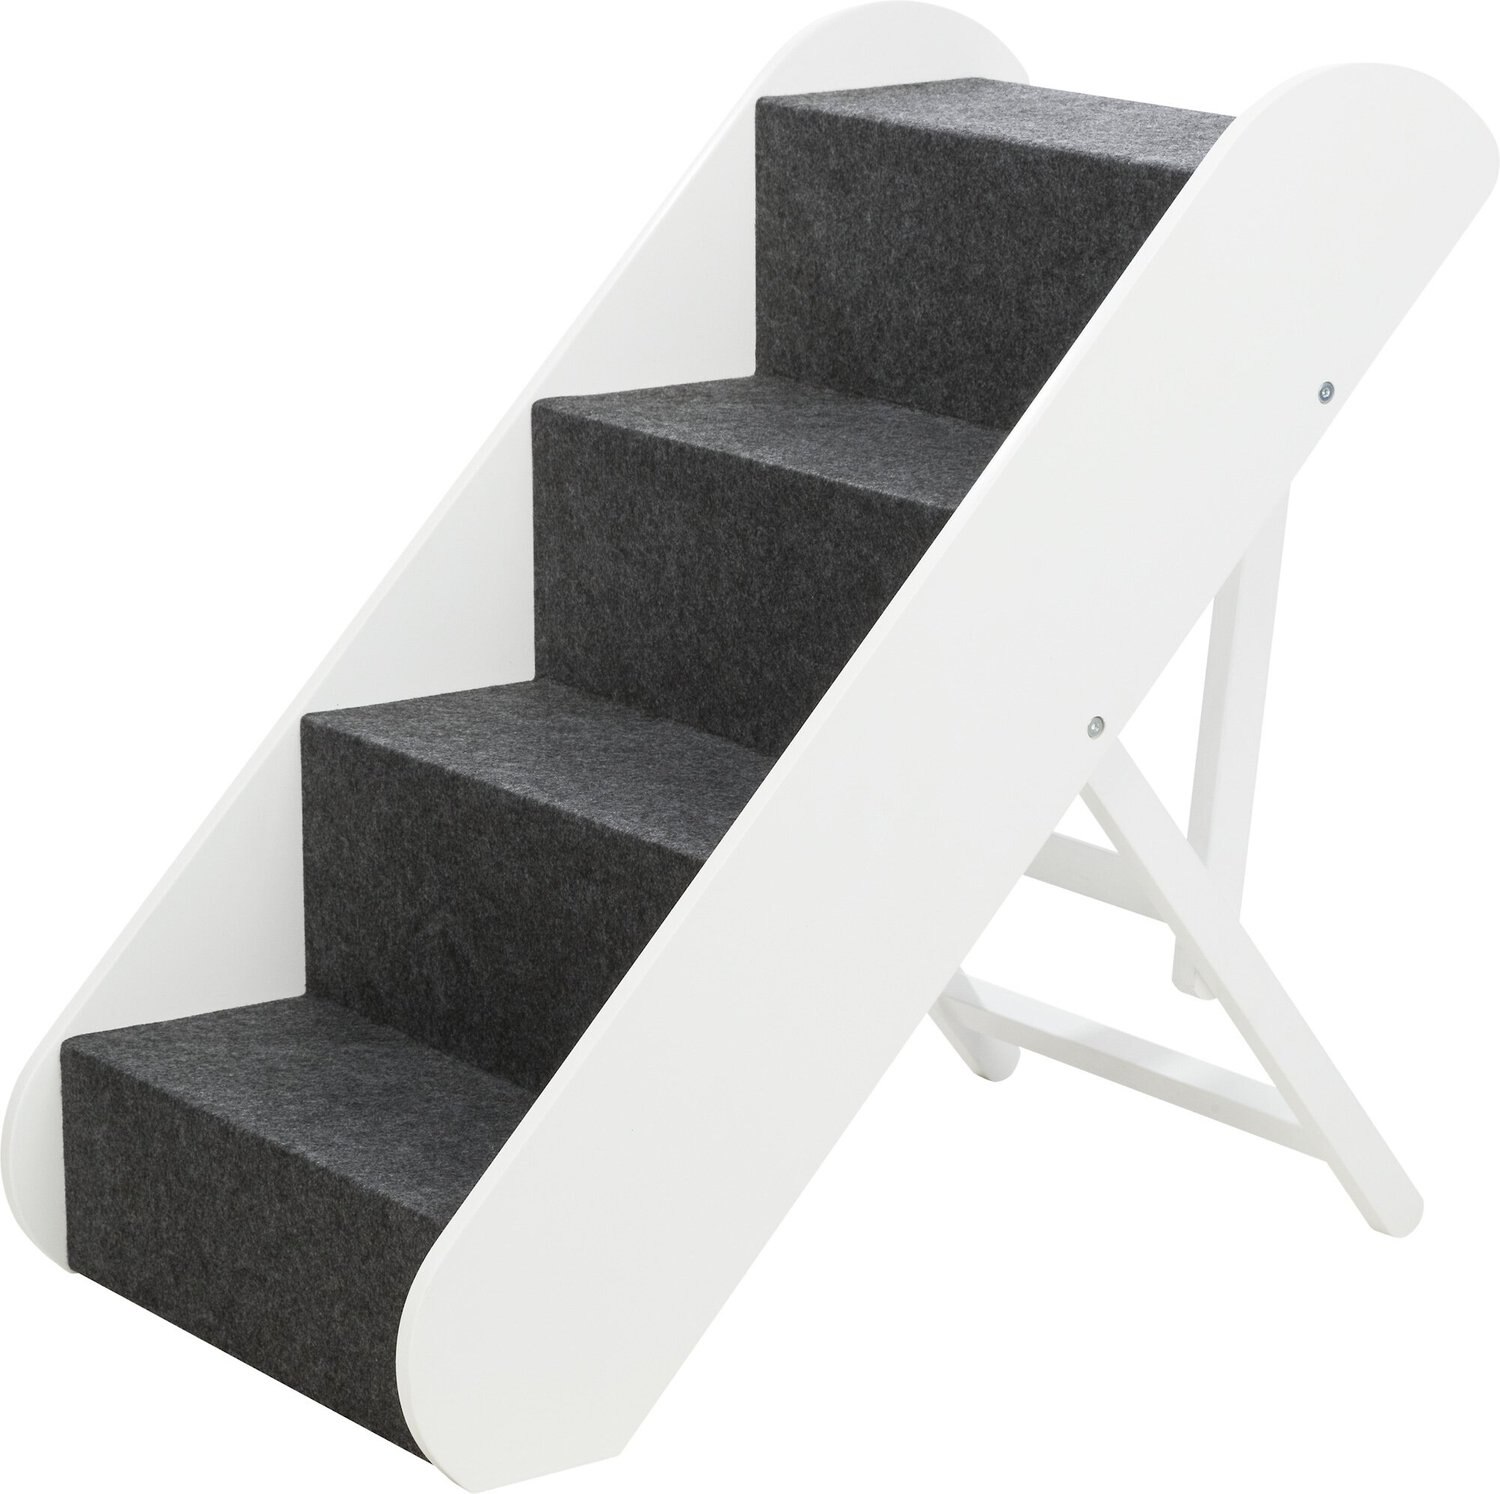 Trixie Pet Products Stairs 